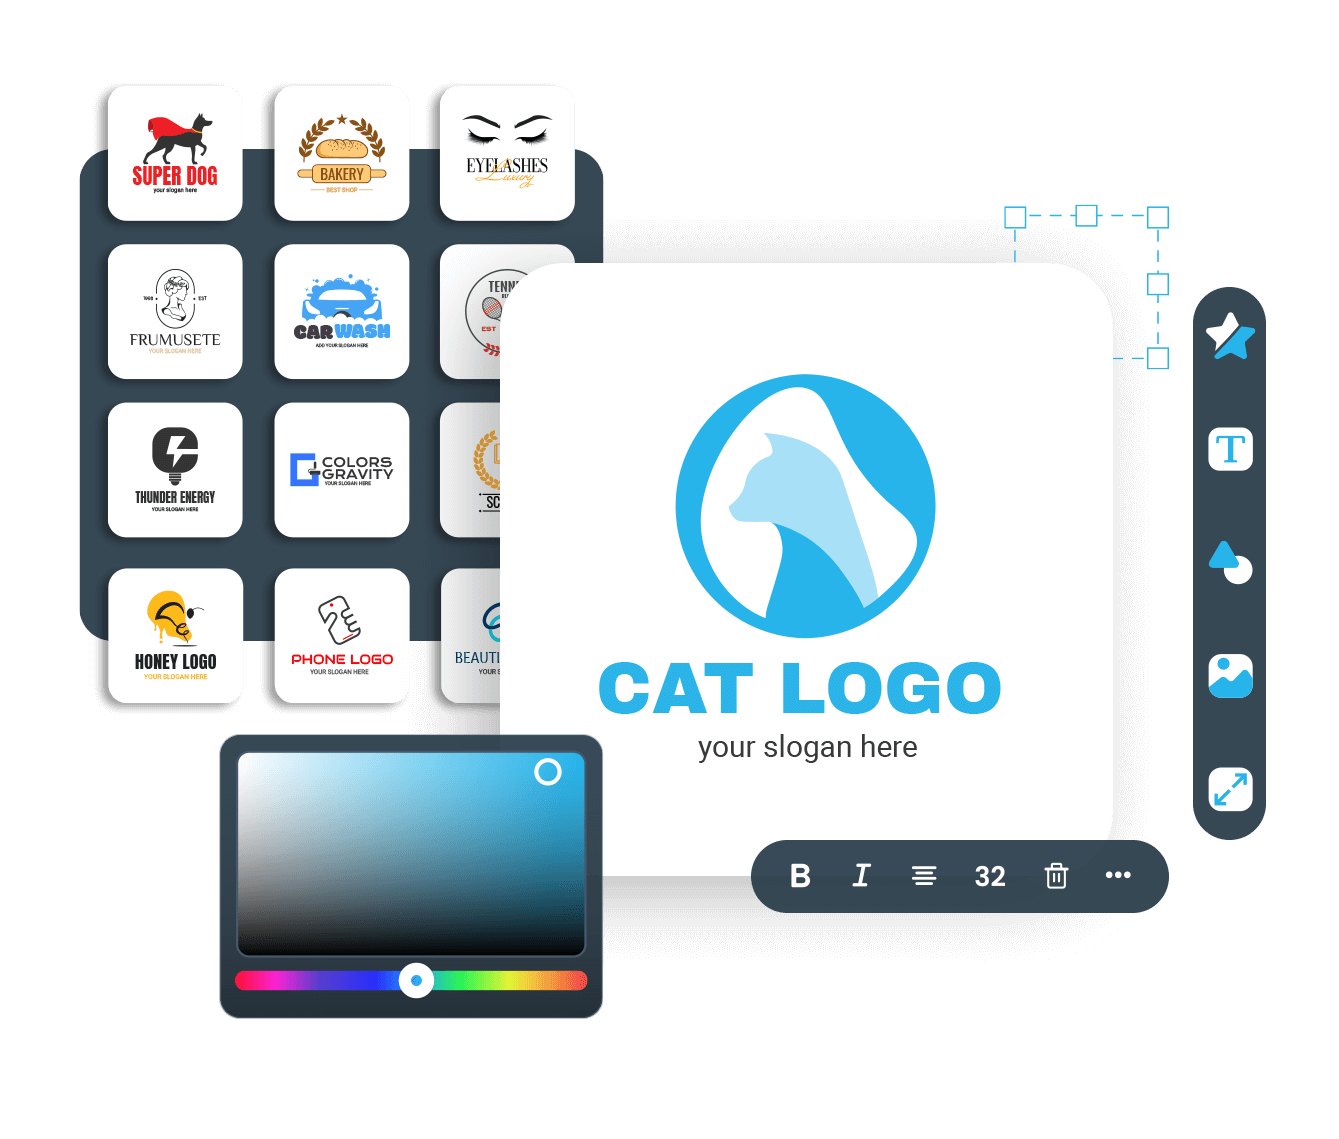 Create your cat logo design online in a few minutes with our online logo creator.